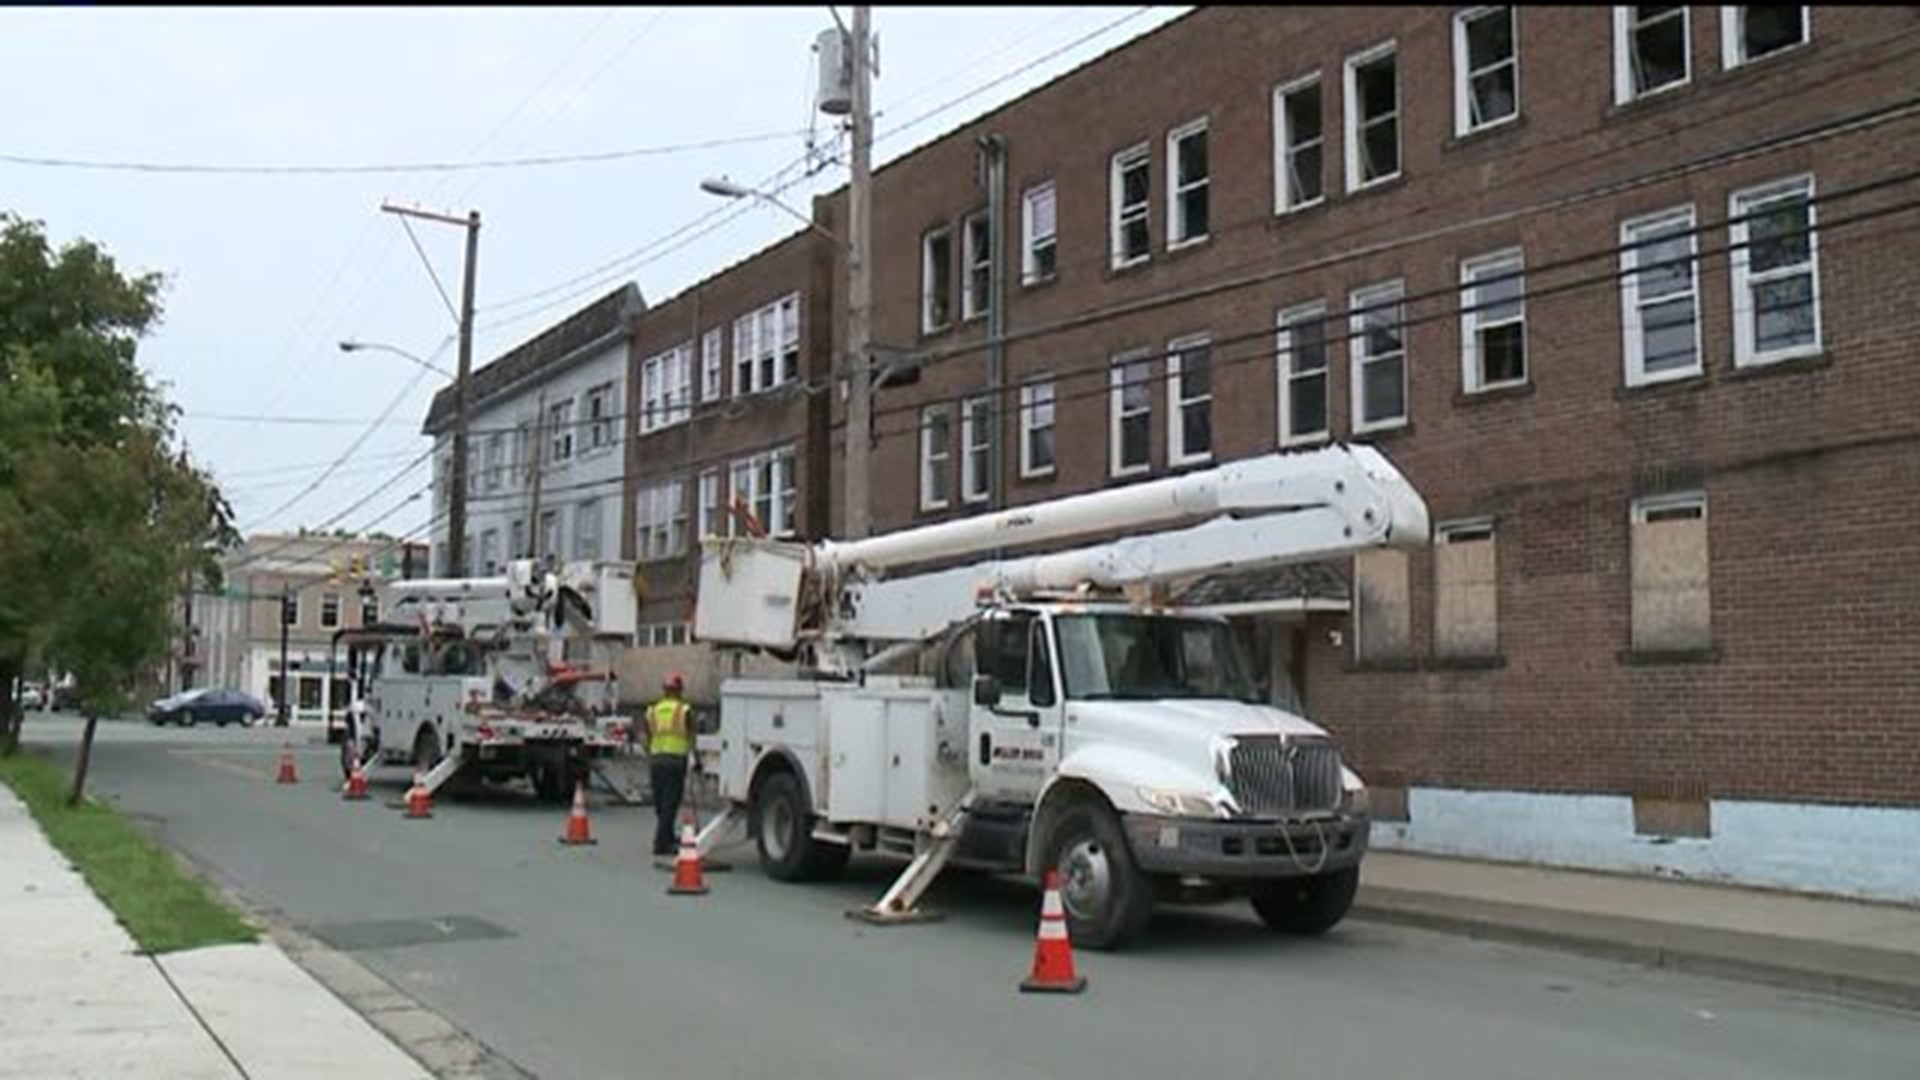 Utility Work Has Part of a Road Shut Down in Stroudsburg